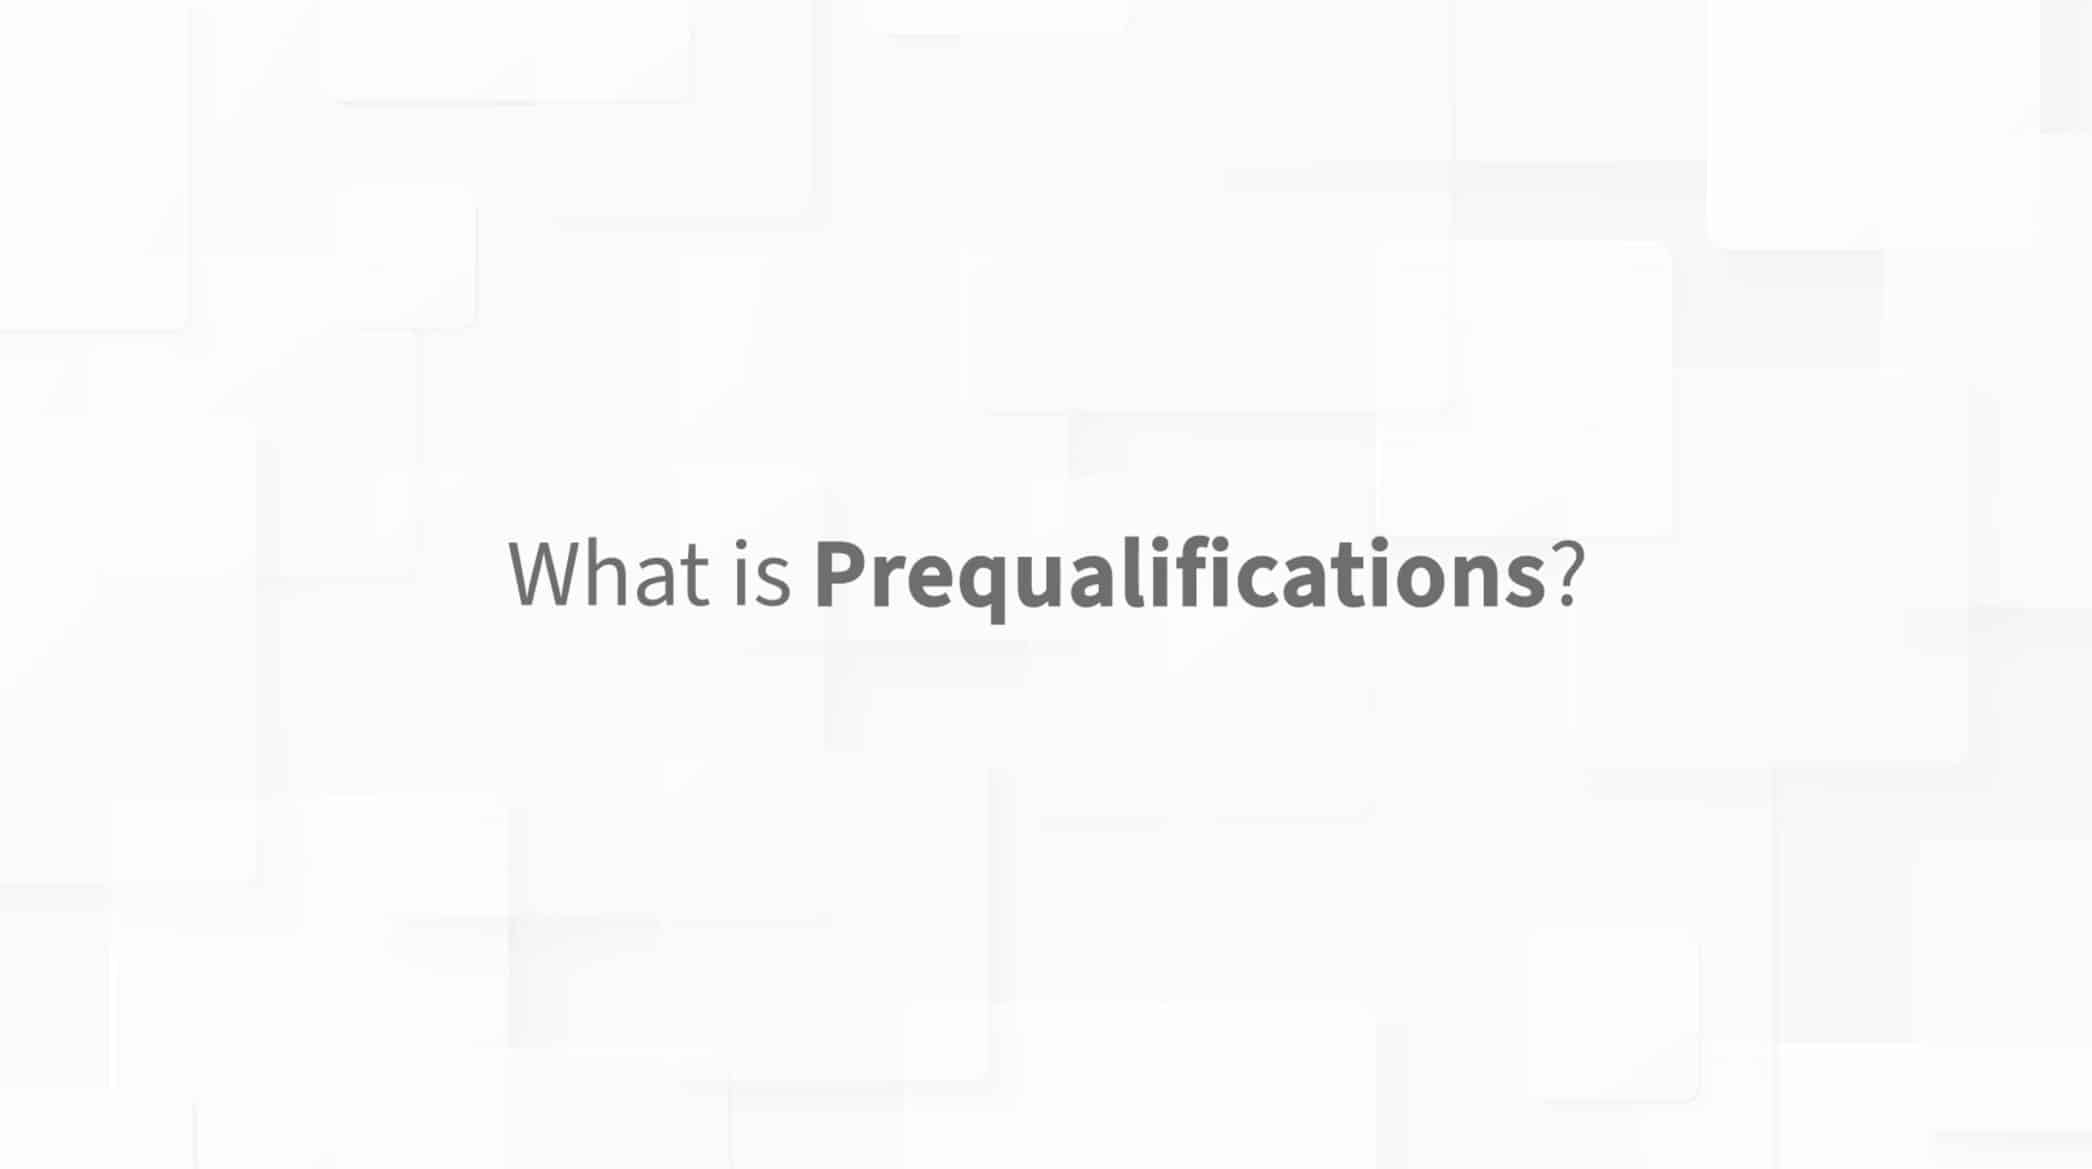 What is Prequalifications?